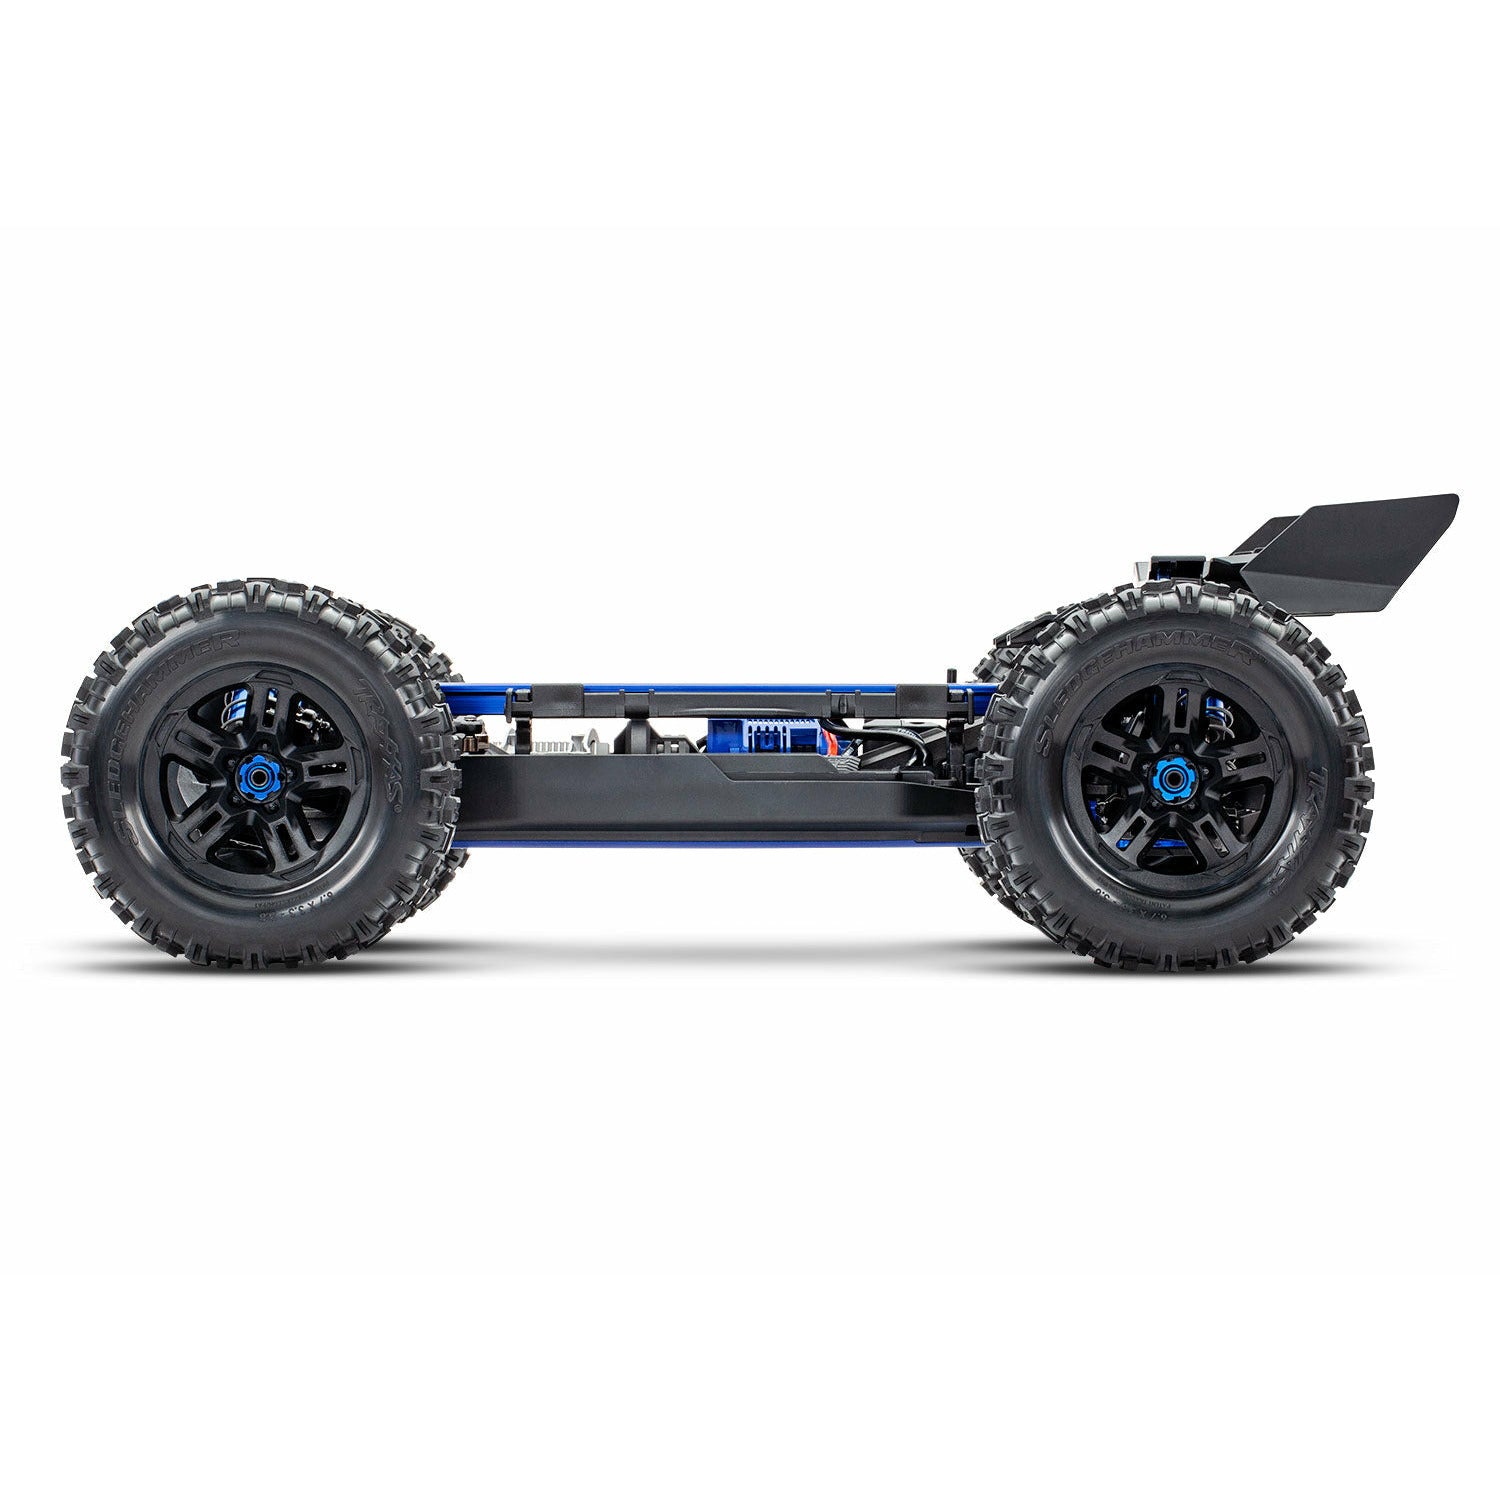 TRAXXAS Sledge Belted 1/8 Scale 4WD Brushless Electric Monster Truck - Blue